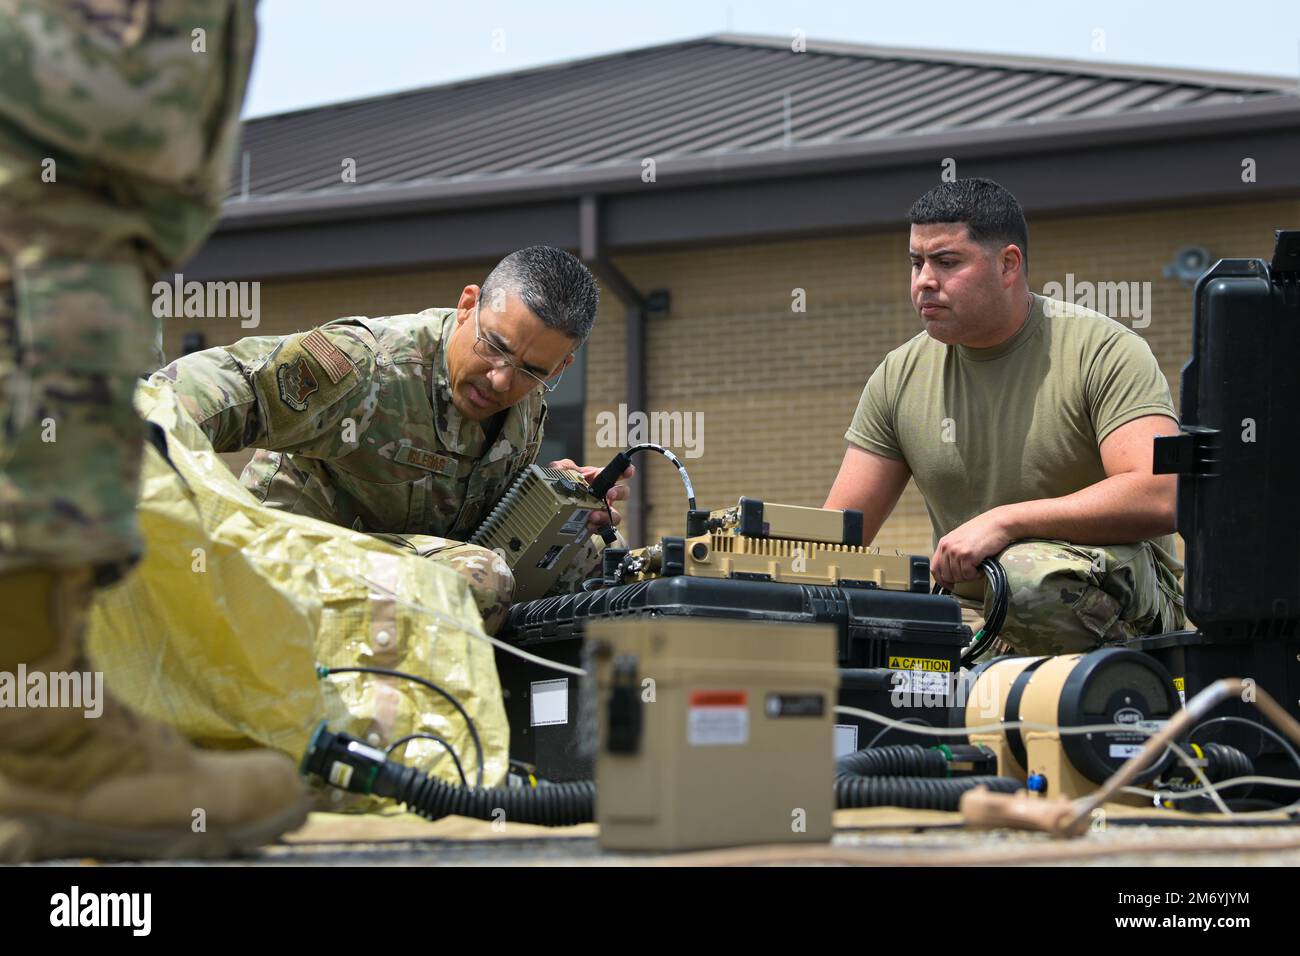 U.S. Air Force Senior Master Sgt. Raul Iglesias, left, the cyber systems support superintendent, and Master Sgt. Radames Mercado, a radio frequency transmission journeyman, both with the 156th Contingency Response Group, prepare the inflatable ground antenna to transmit and receive ball (GATR) which will be used to establish phone, data, and voice services on non-classified internet protocol router network (NIPRNet) and secret internet protocol router network (SIPRNet) during Southern Strike at Gulfport Combat Readiness Training Center, Gulfport, Mississippi, April 20, 2022. Southern Strike 20 Stock Photo